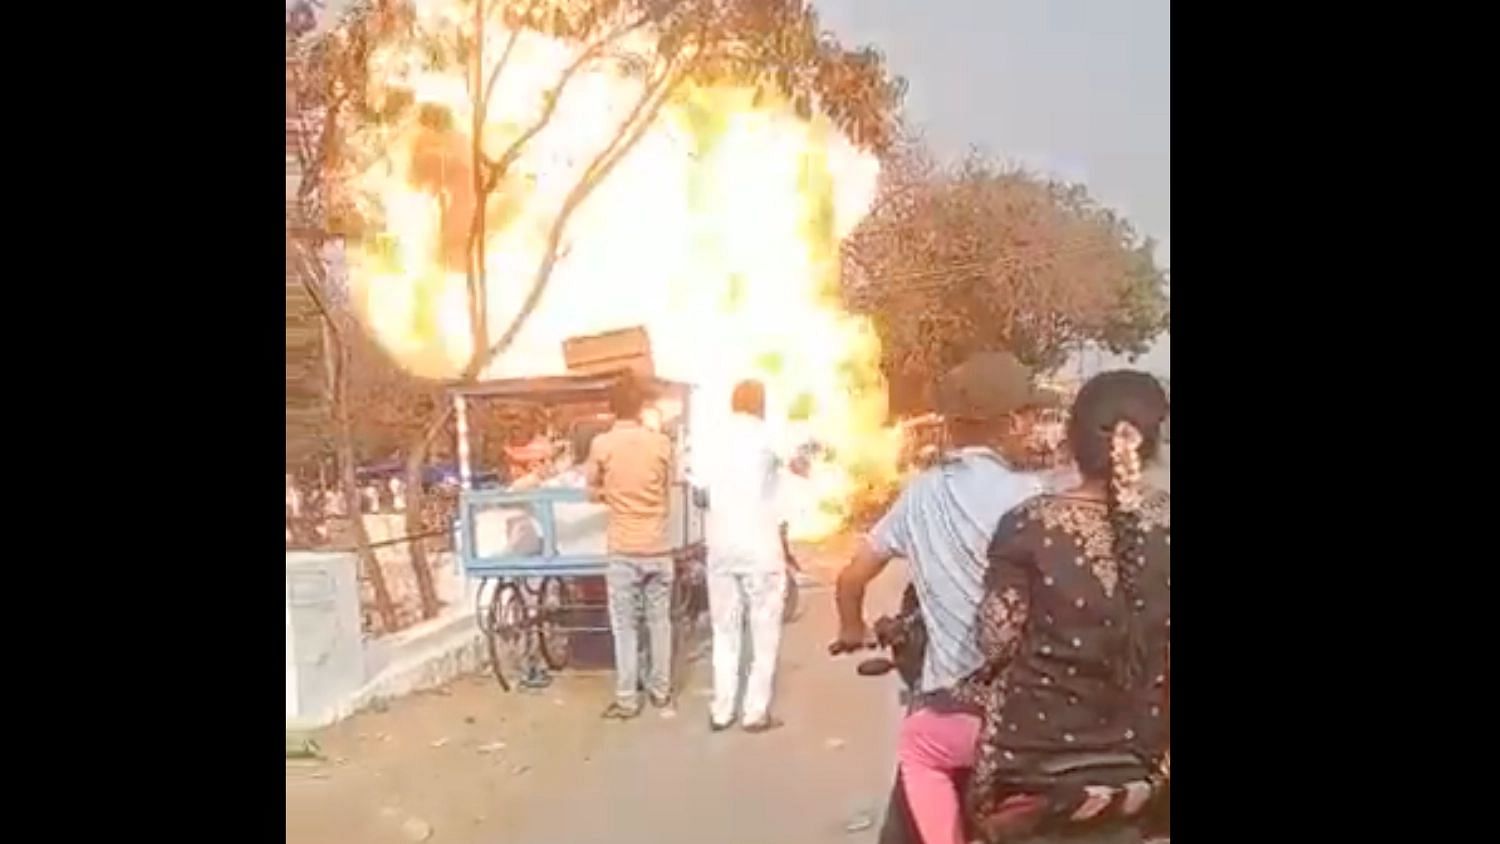 <div class="paragraphs"><p>A brand-new Royal Enfield motorcycle caught fire and exploded outside a temple in Andhra Pradesh’s Anantapur district on Sunday, 3 April. No injuries have been reported yet.</p></div>